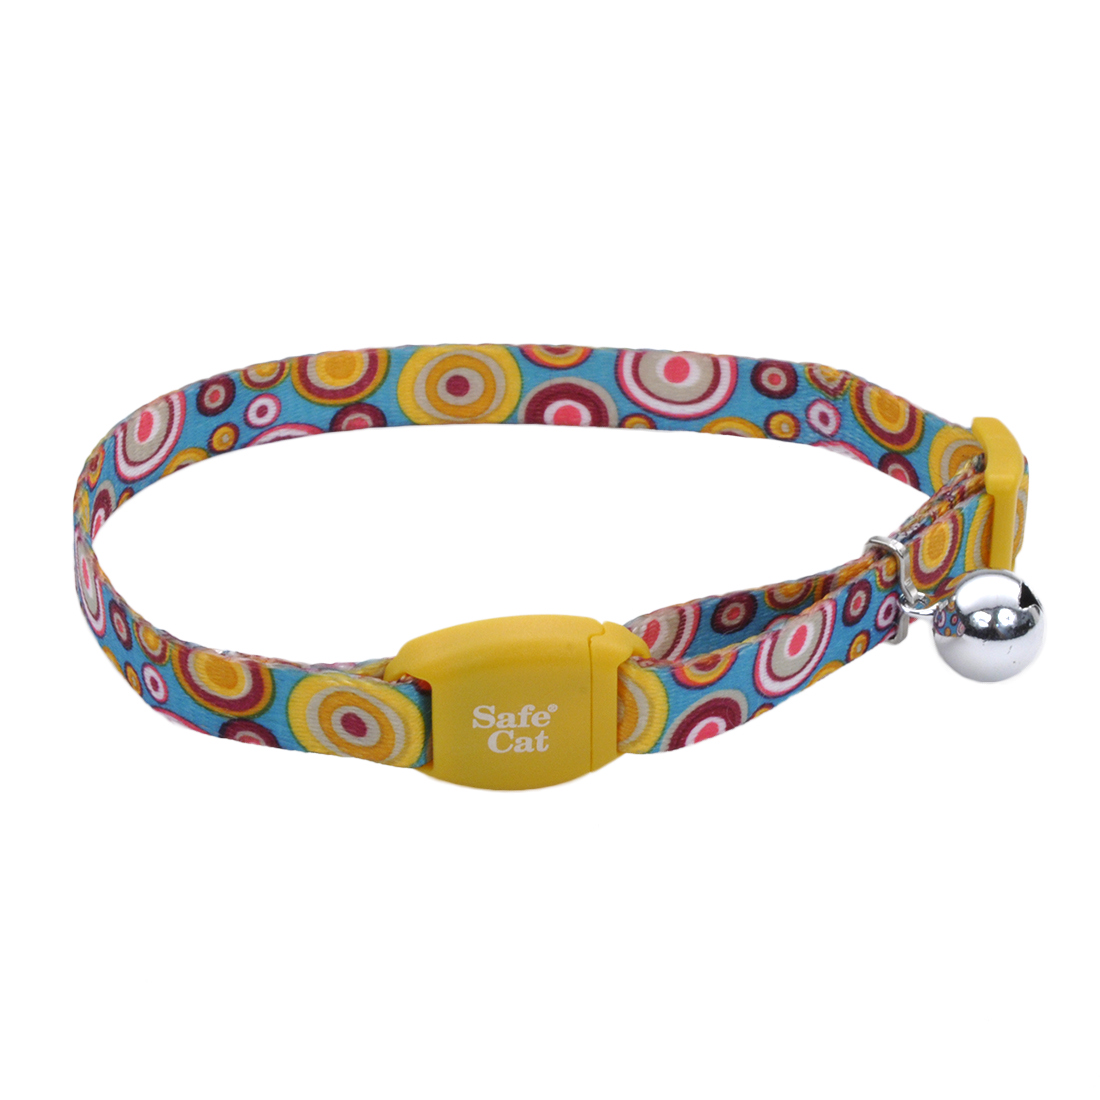 Coastal 3 and Safe Cat Break Away With Magnetic Buckle Collar GPlkaDot